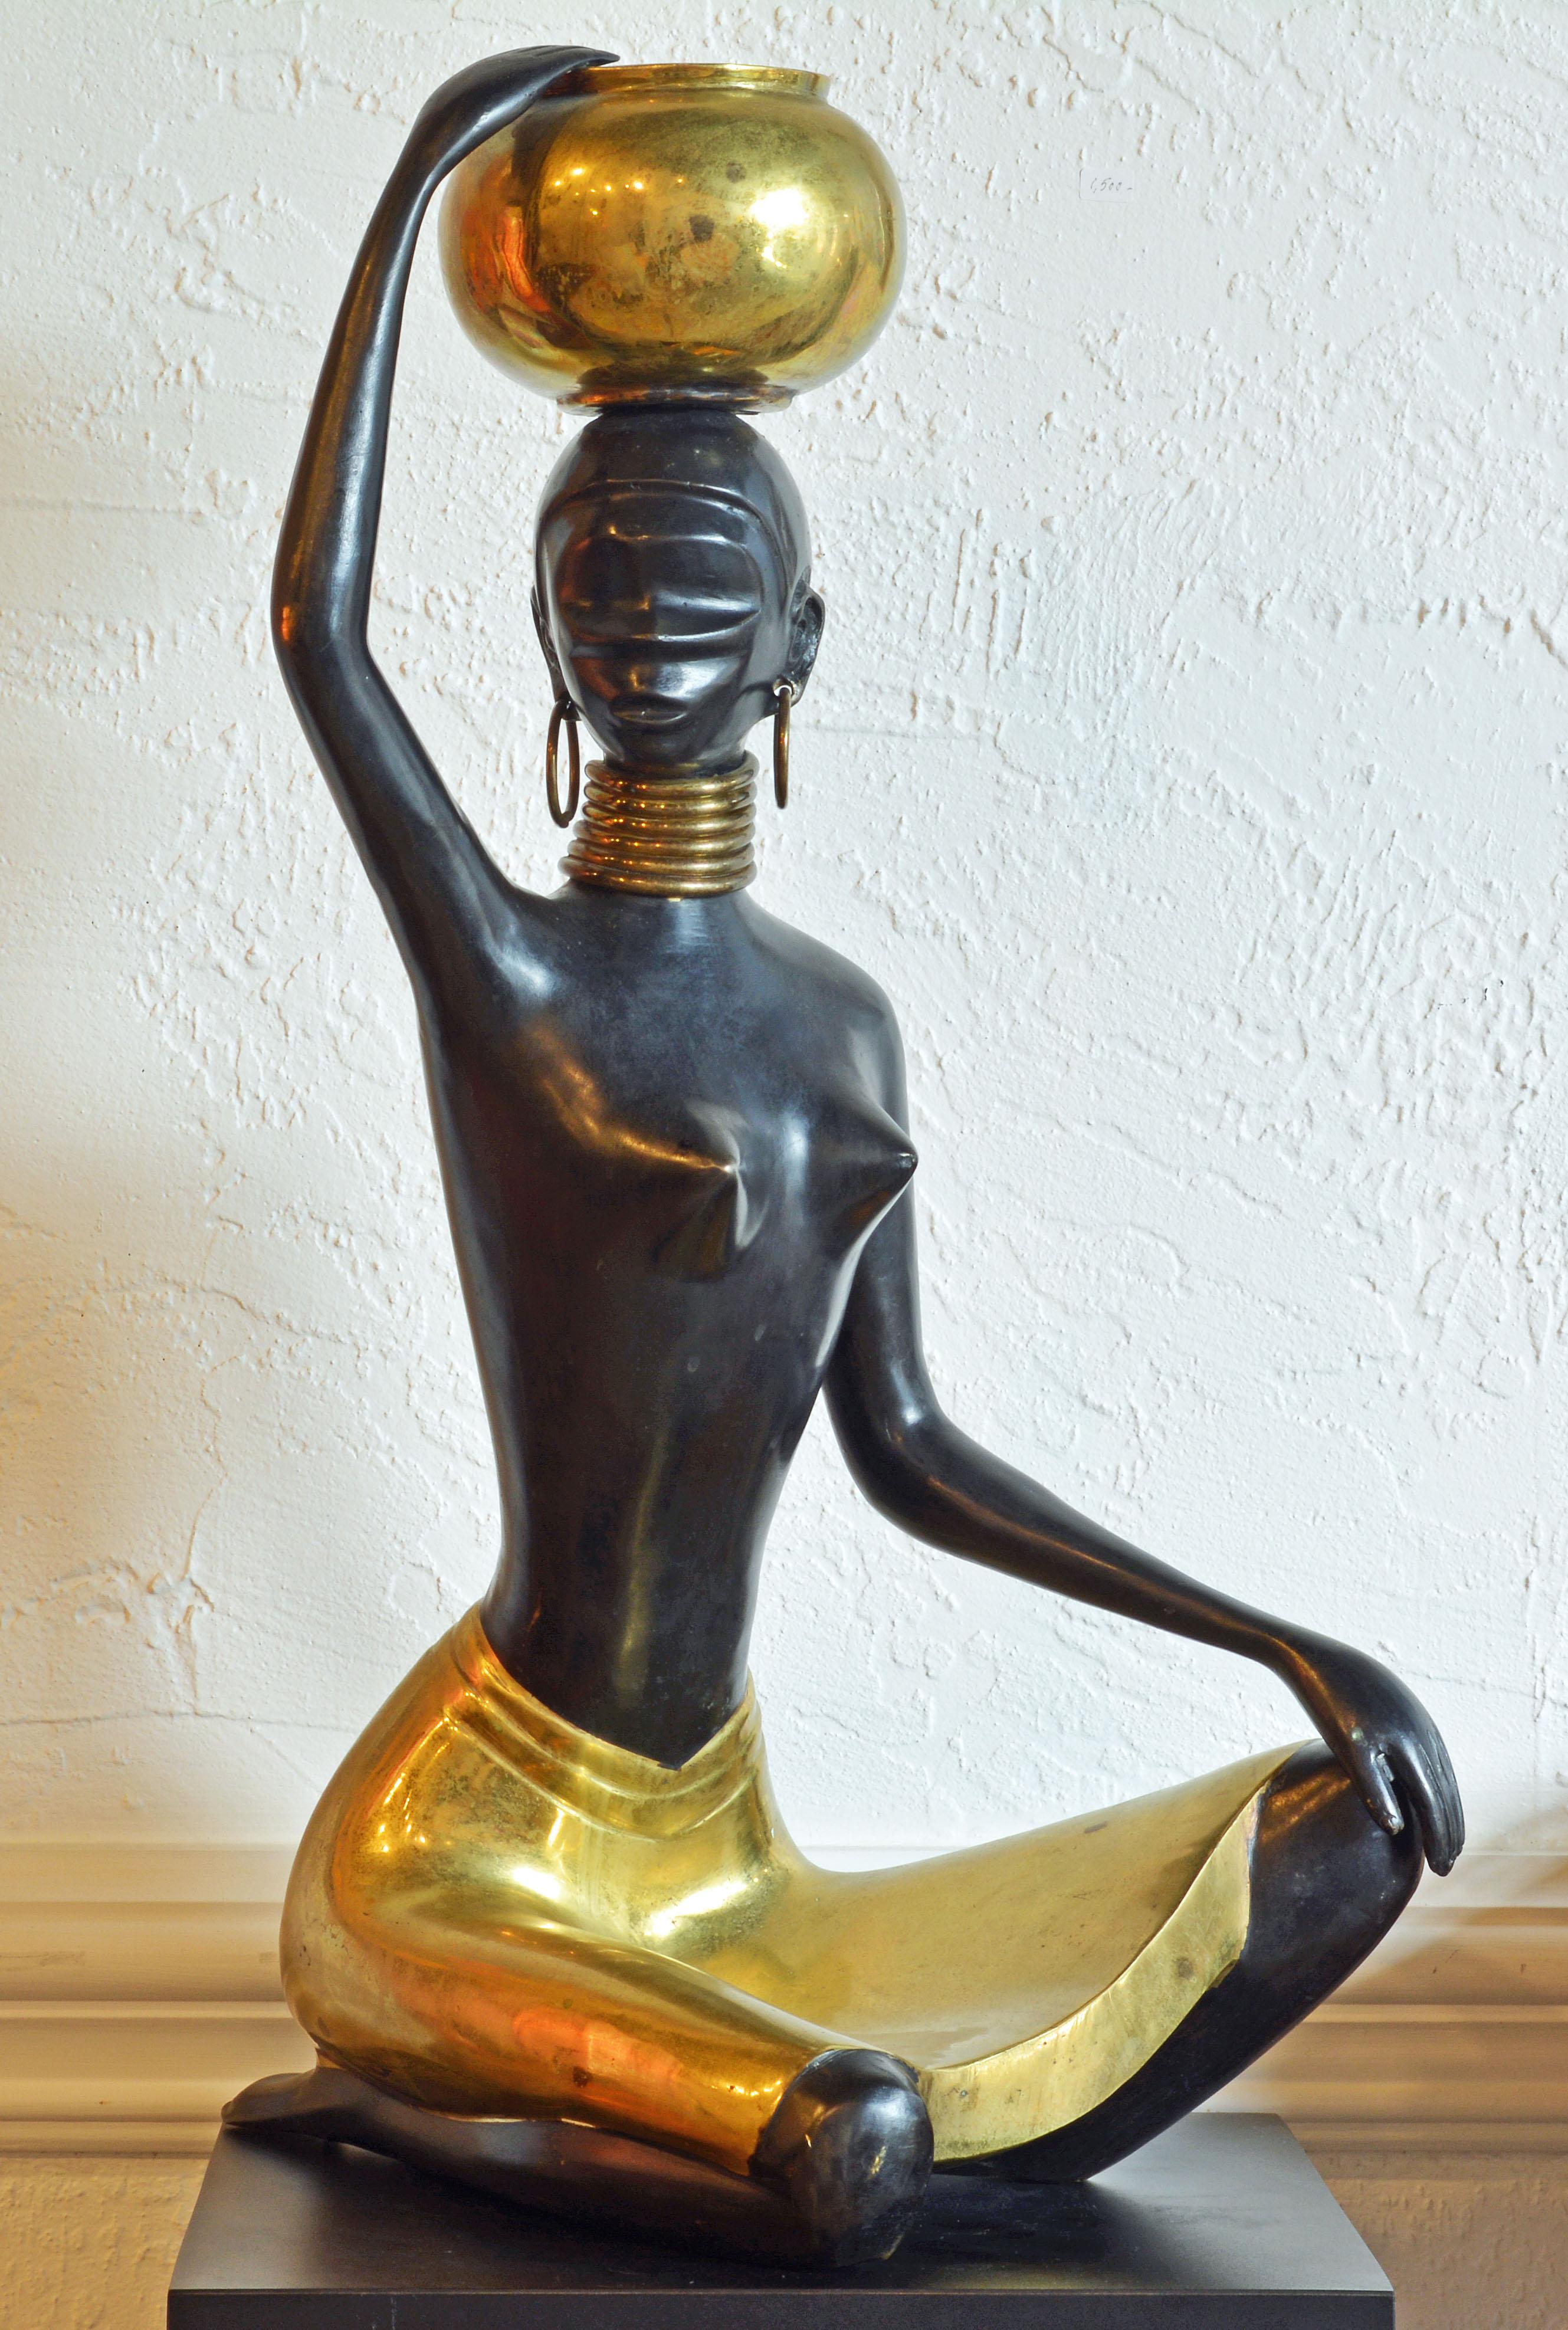 European Midcentury Art Deco Bronze and Brass Sculpture of a Young Woman, Hagenauer Style